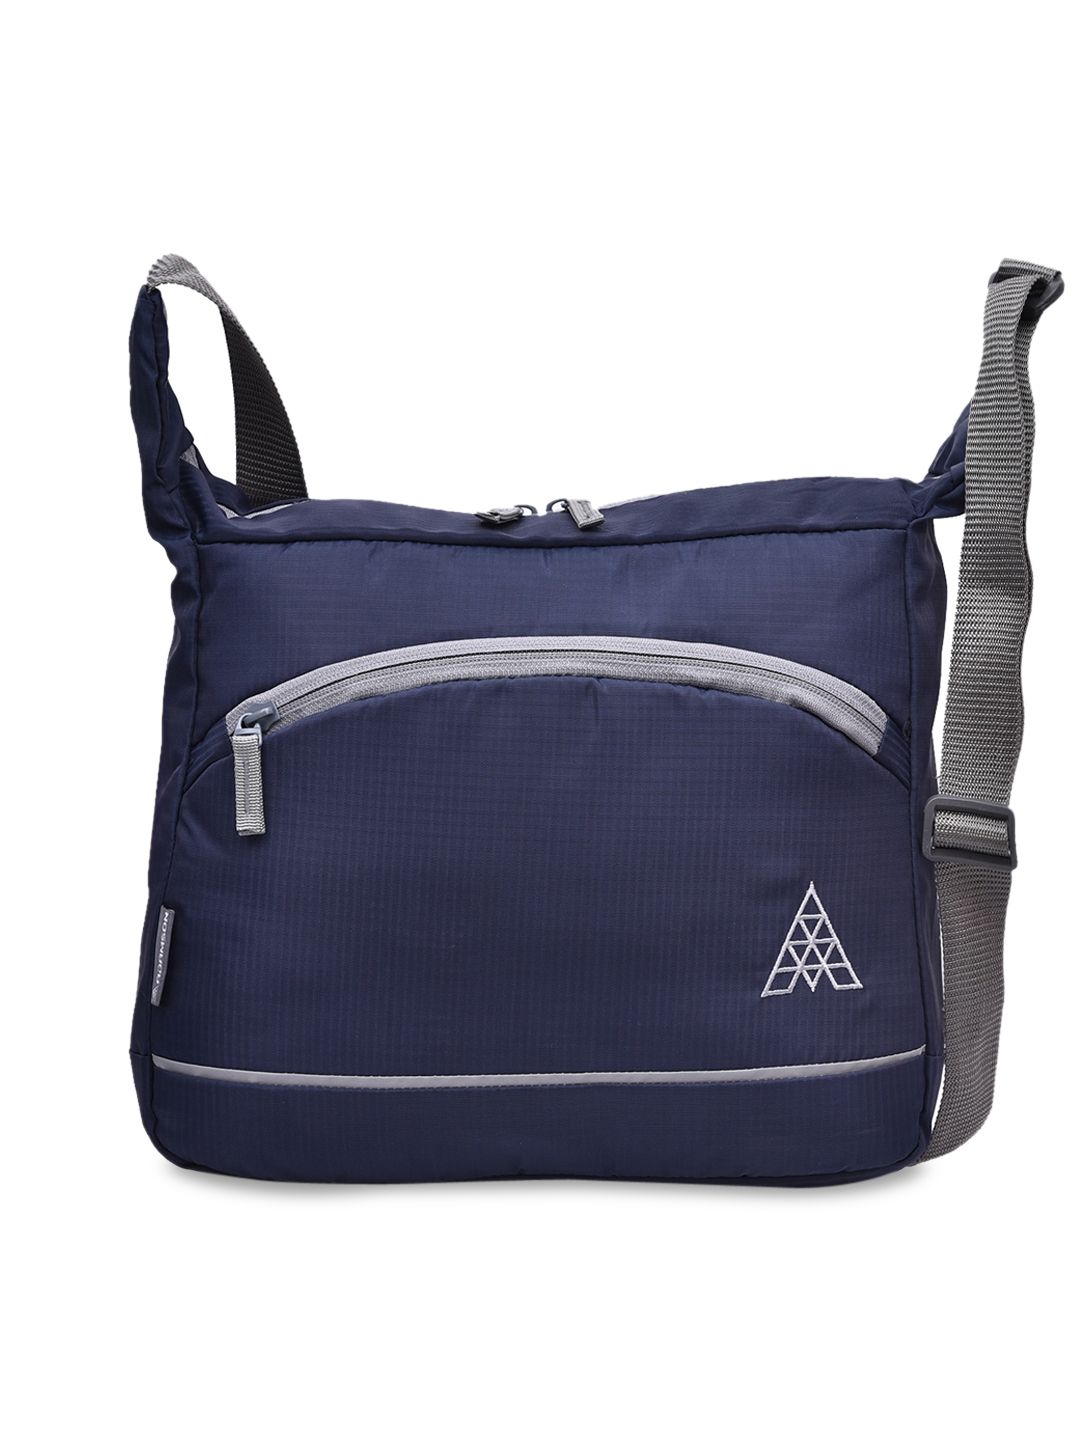 ADAMSON Blue Structured Sling Bag Price in India